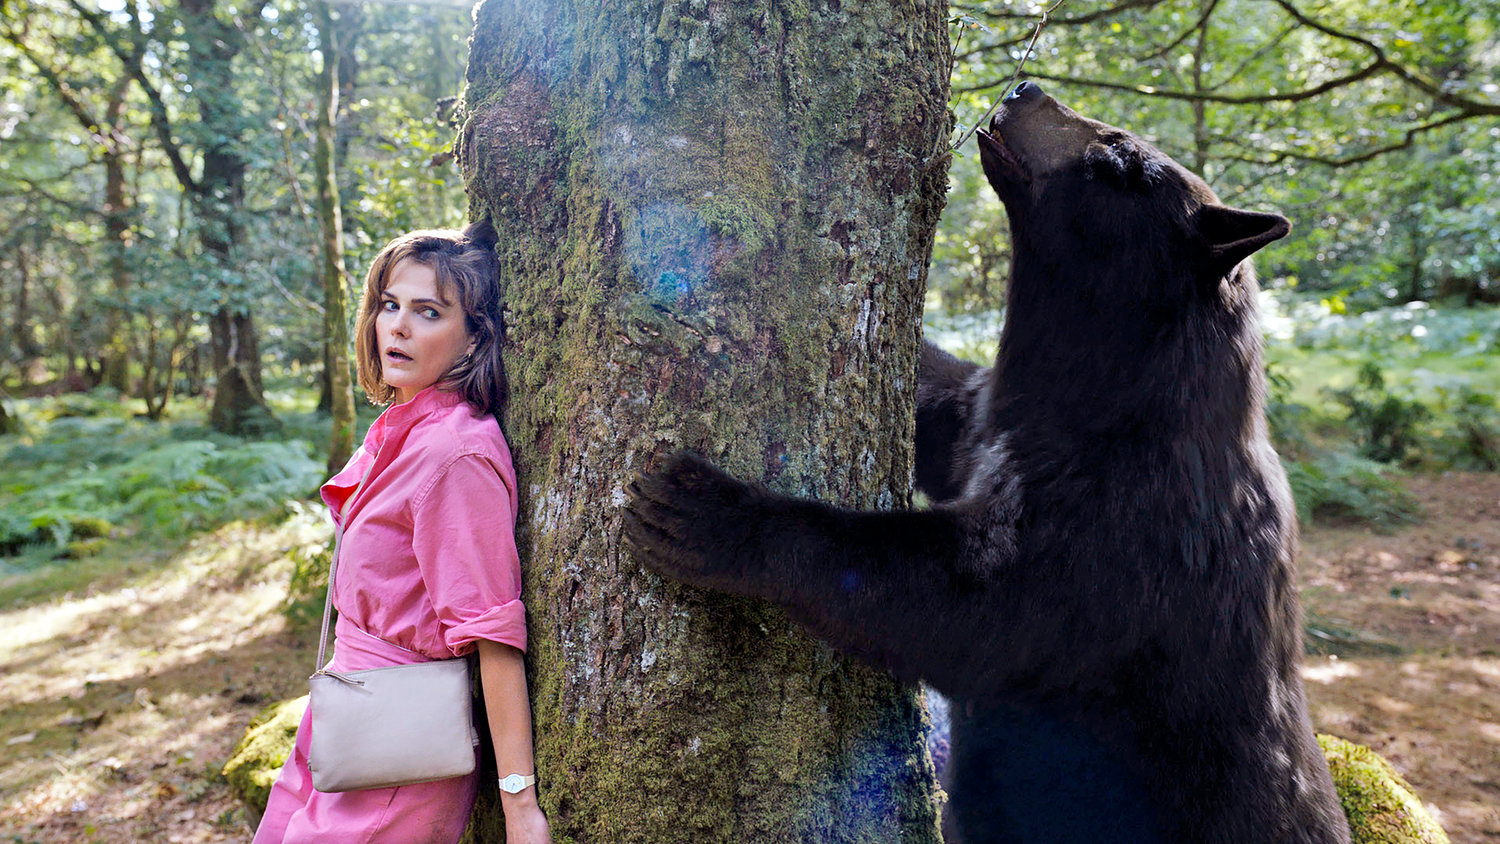 Keri Russell in a scene from “Cocaine Bear,” directed by Elizabeth Banks.